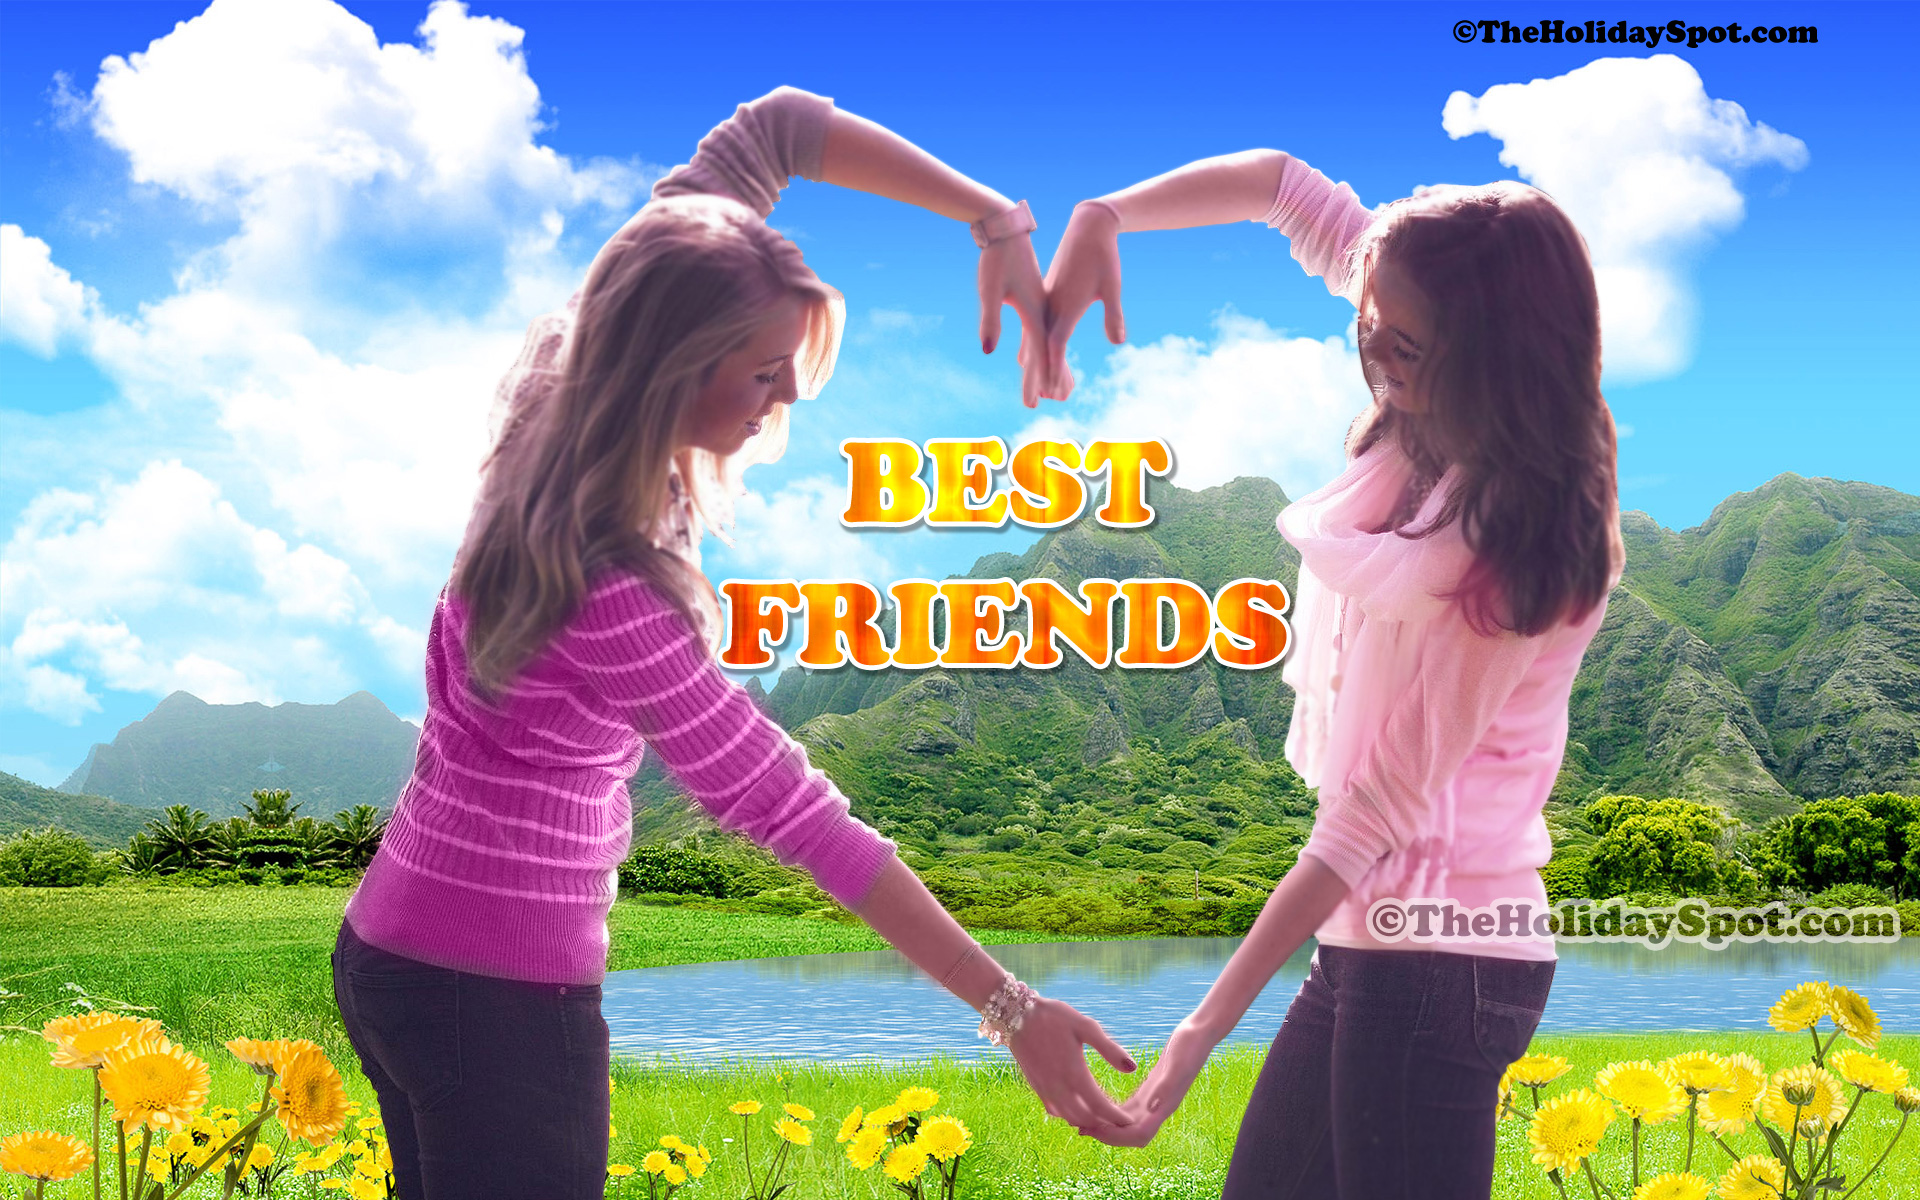 High Quality wallpaper on friendship featuring two friend sharing